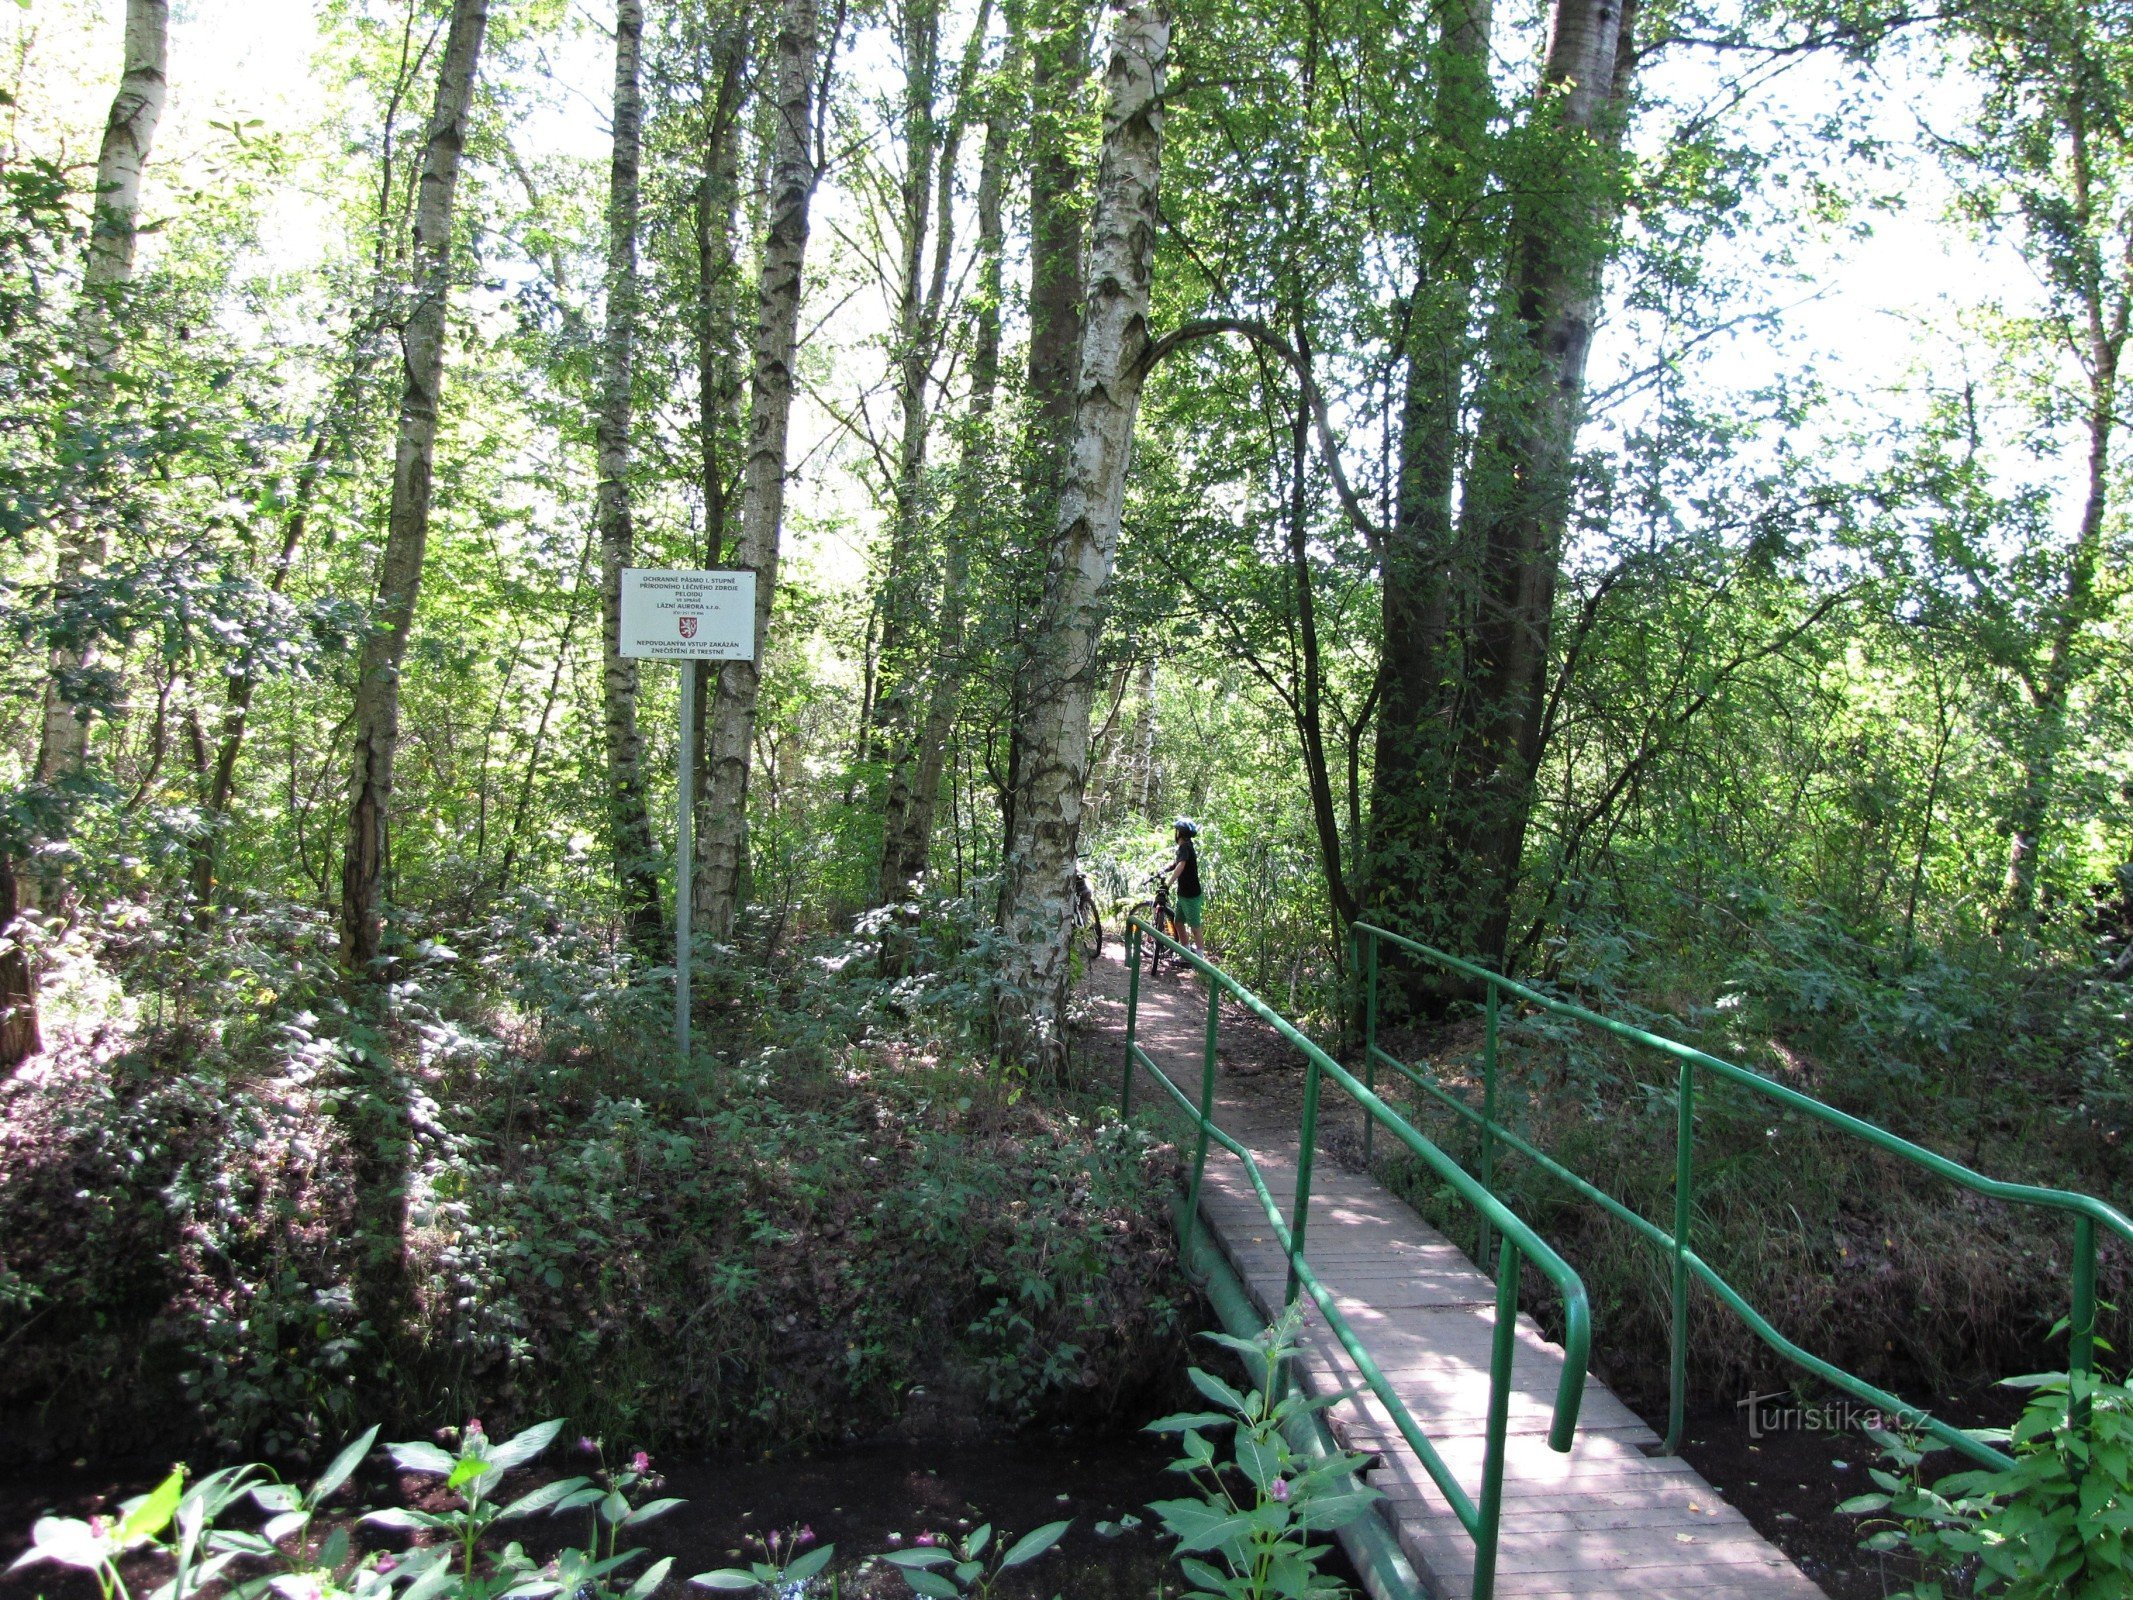 The nature trail